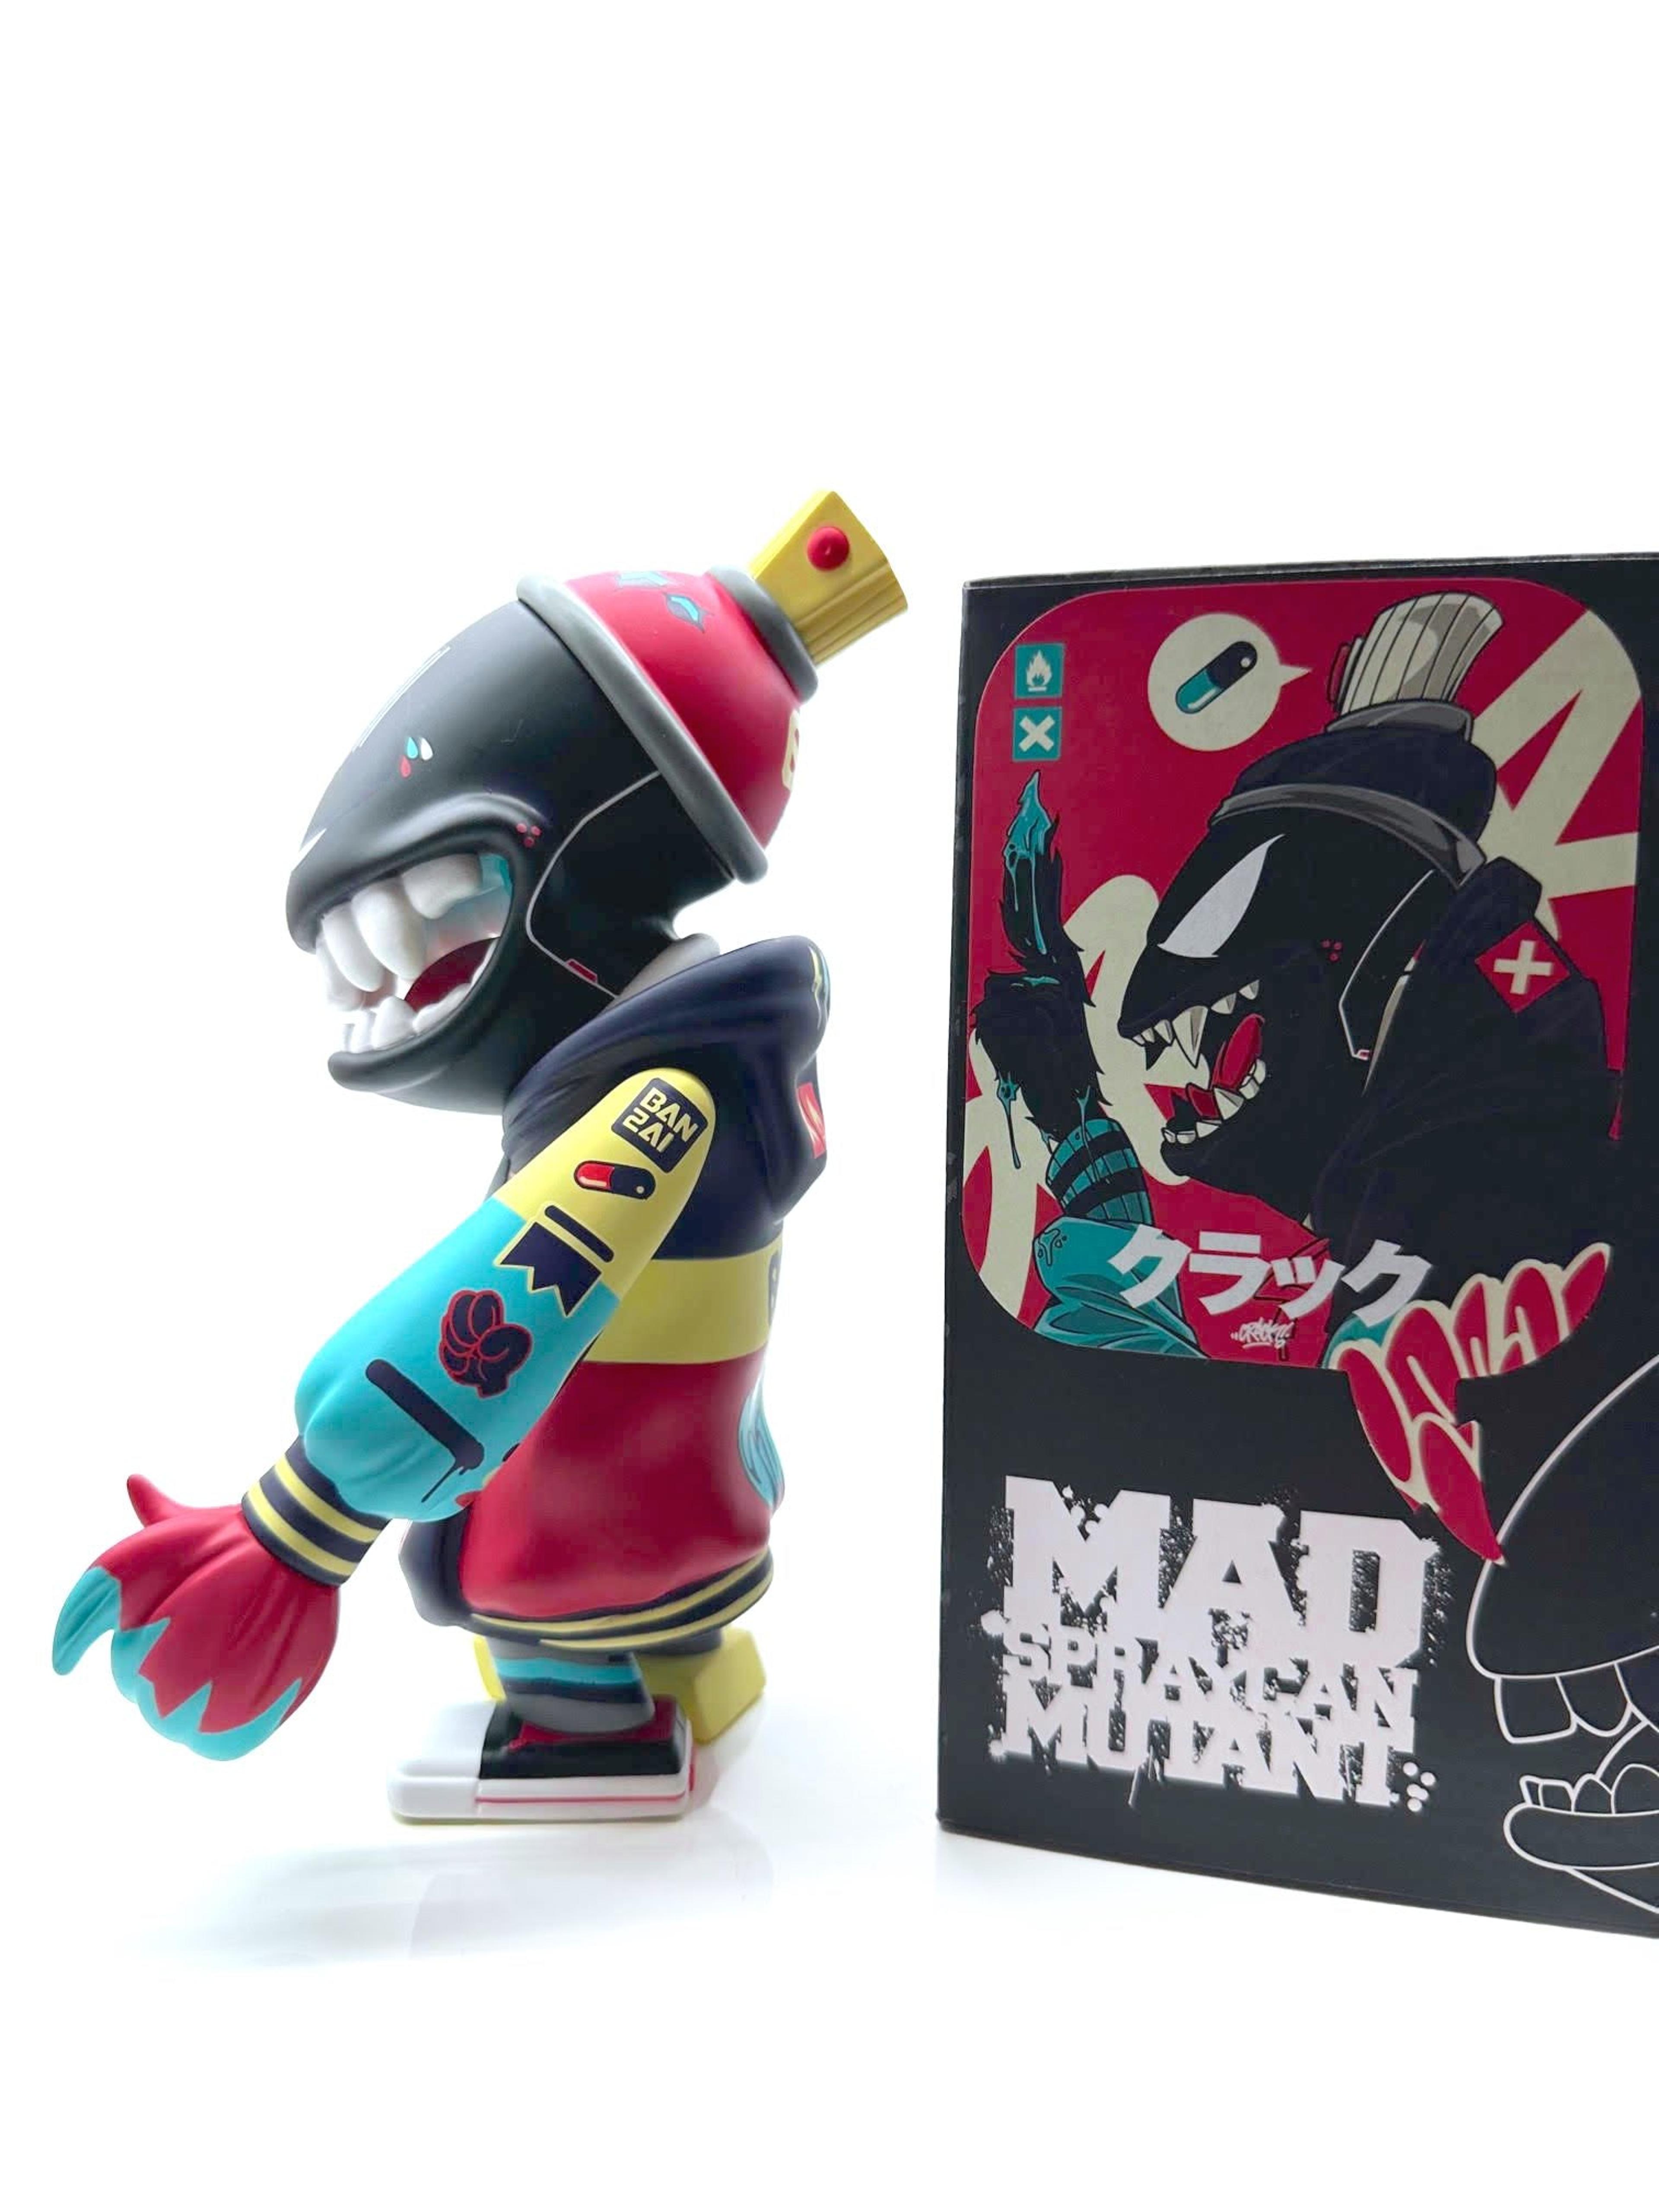 Alternate View 7 of "The Can" Mad Spraycan Mutant by x Crack x Jeremy MadL  x  Marti